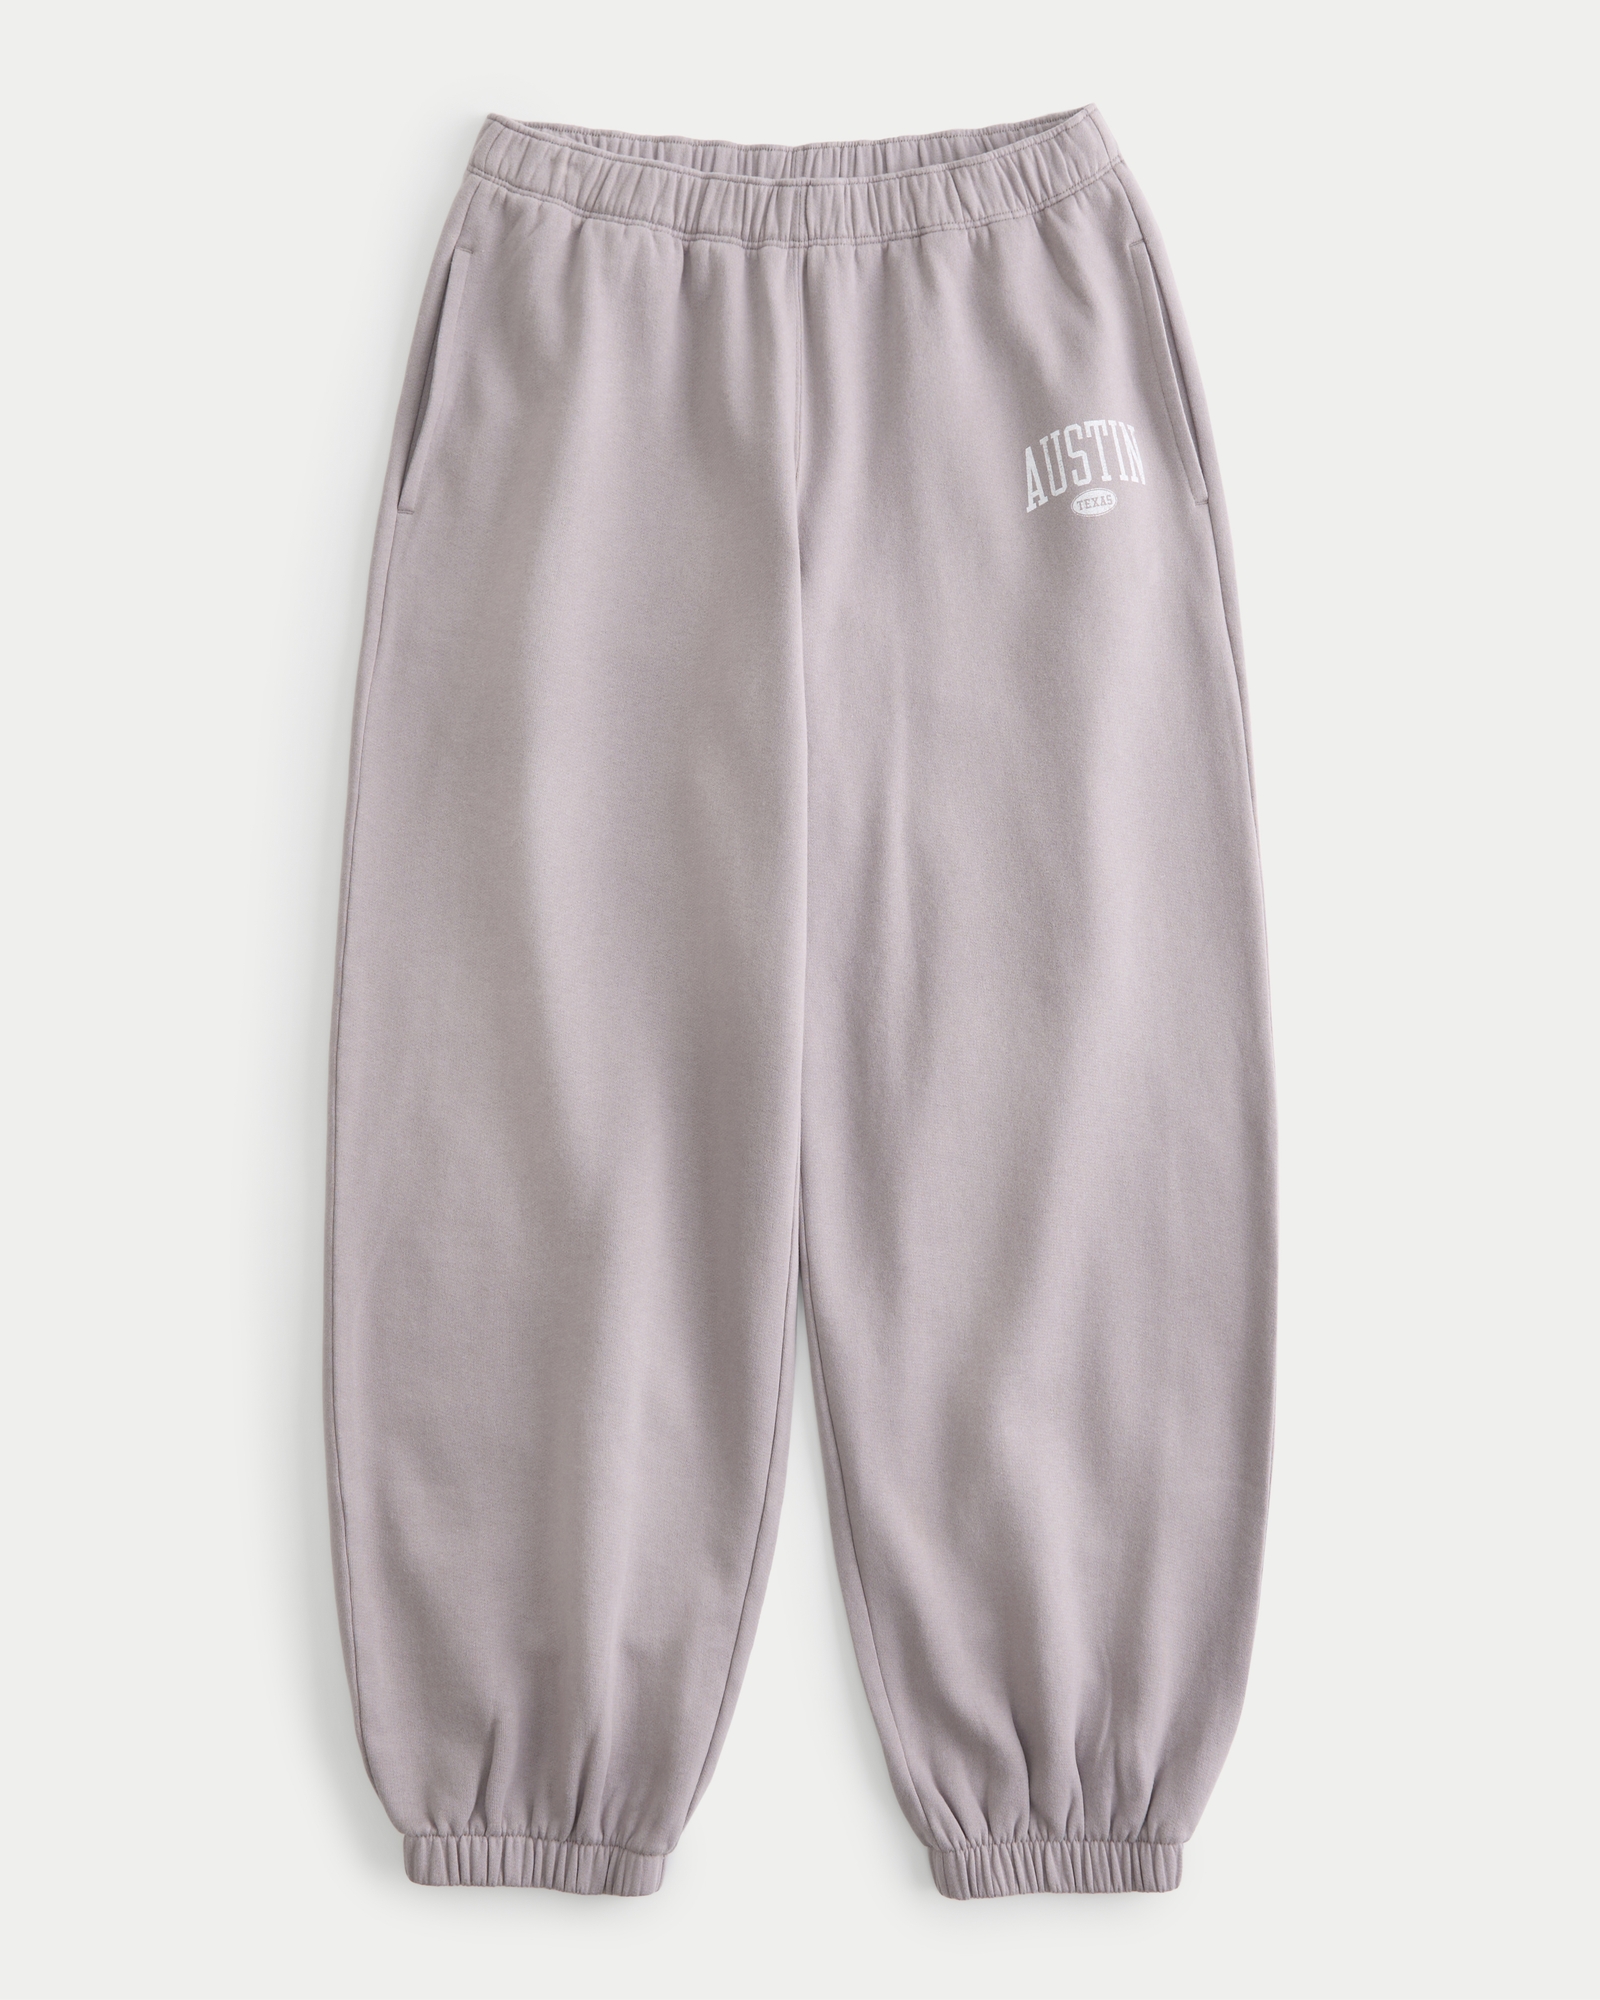 Hollister sweatpants Gray Size XS - $24 (31% Off Retail) - From Lainey